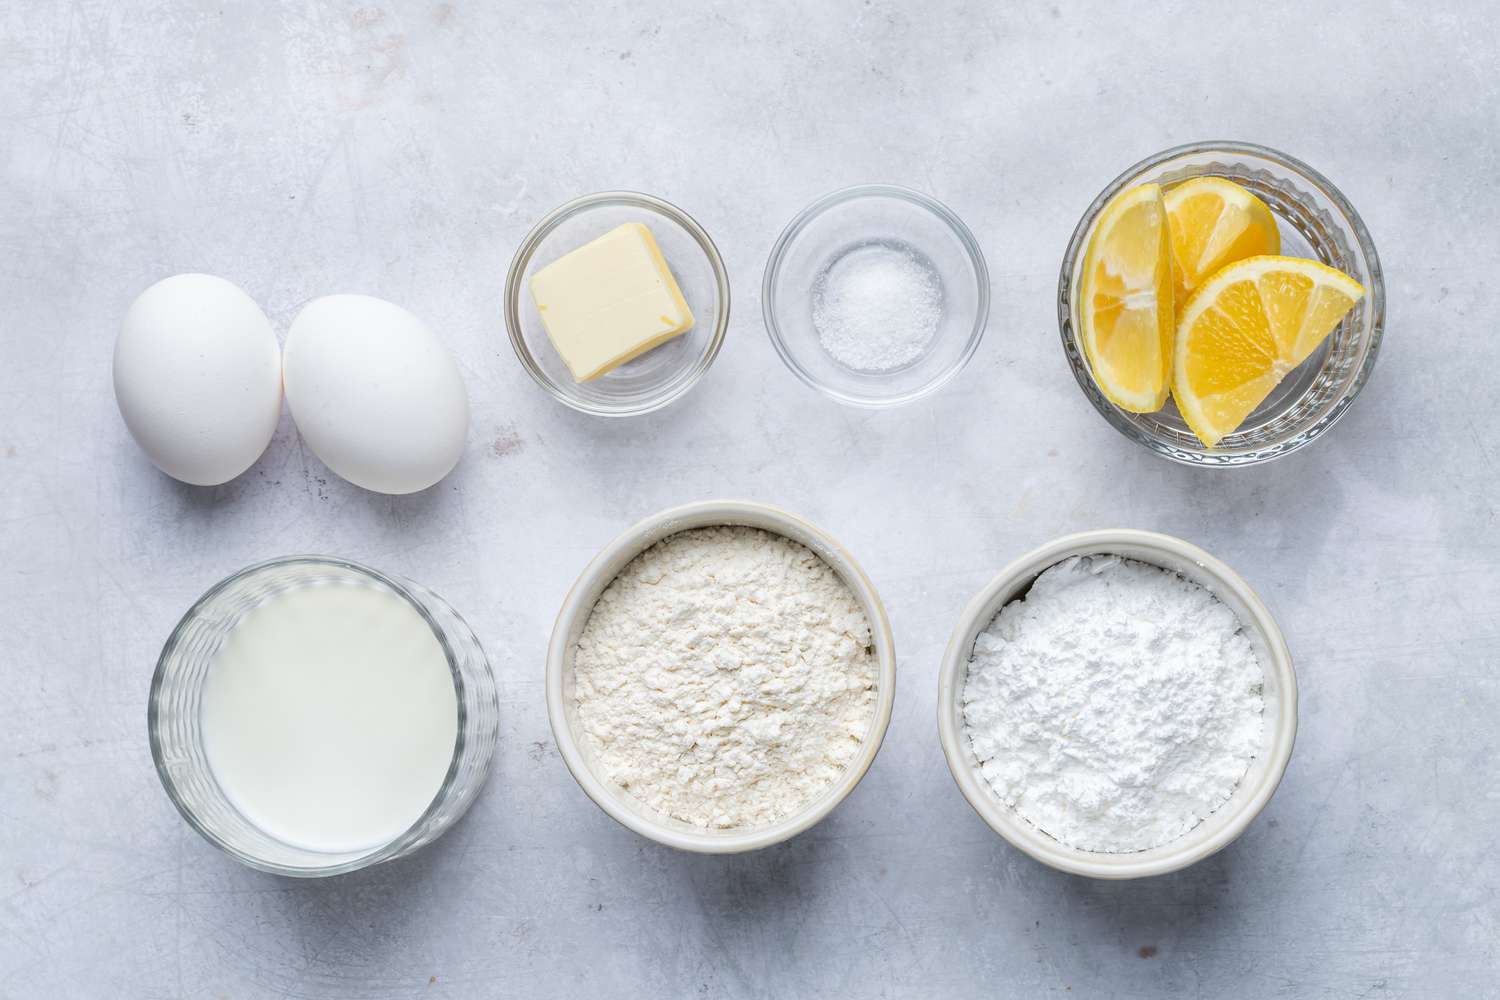 Ingredients to make a Dutch baby